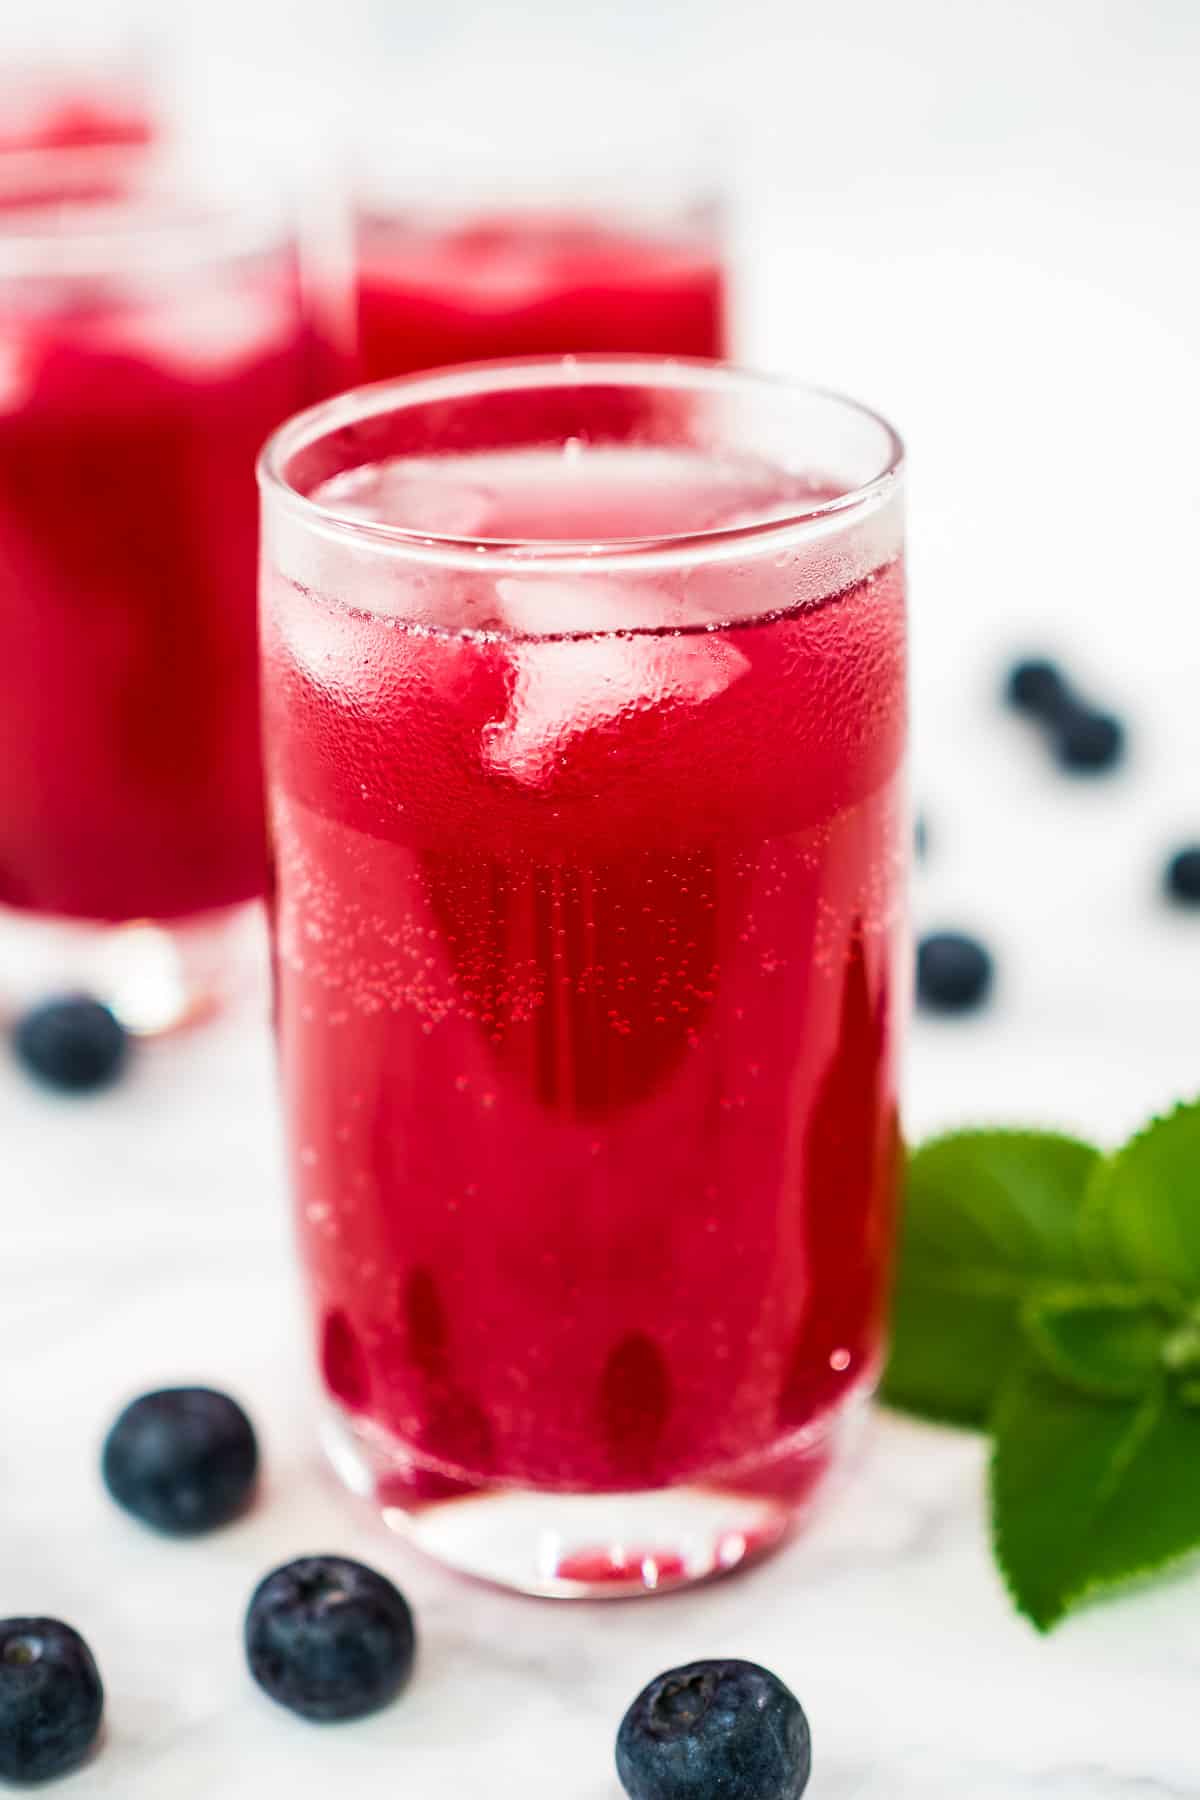 Iced blueberry soda drink in a glass.